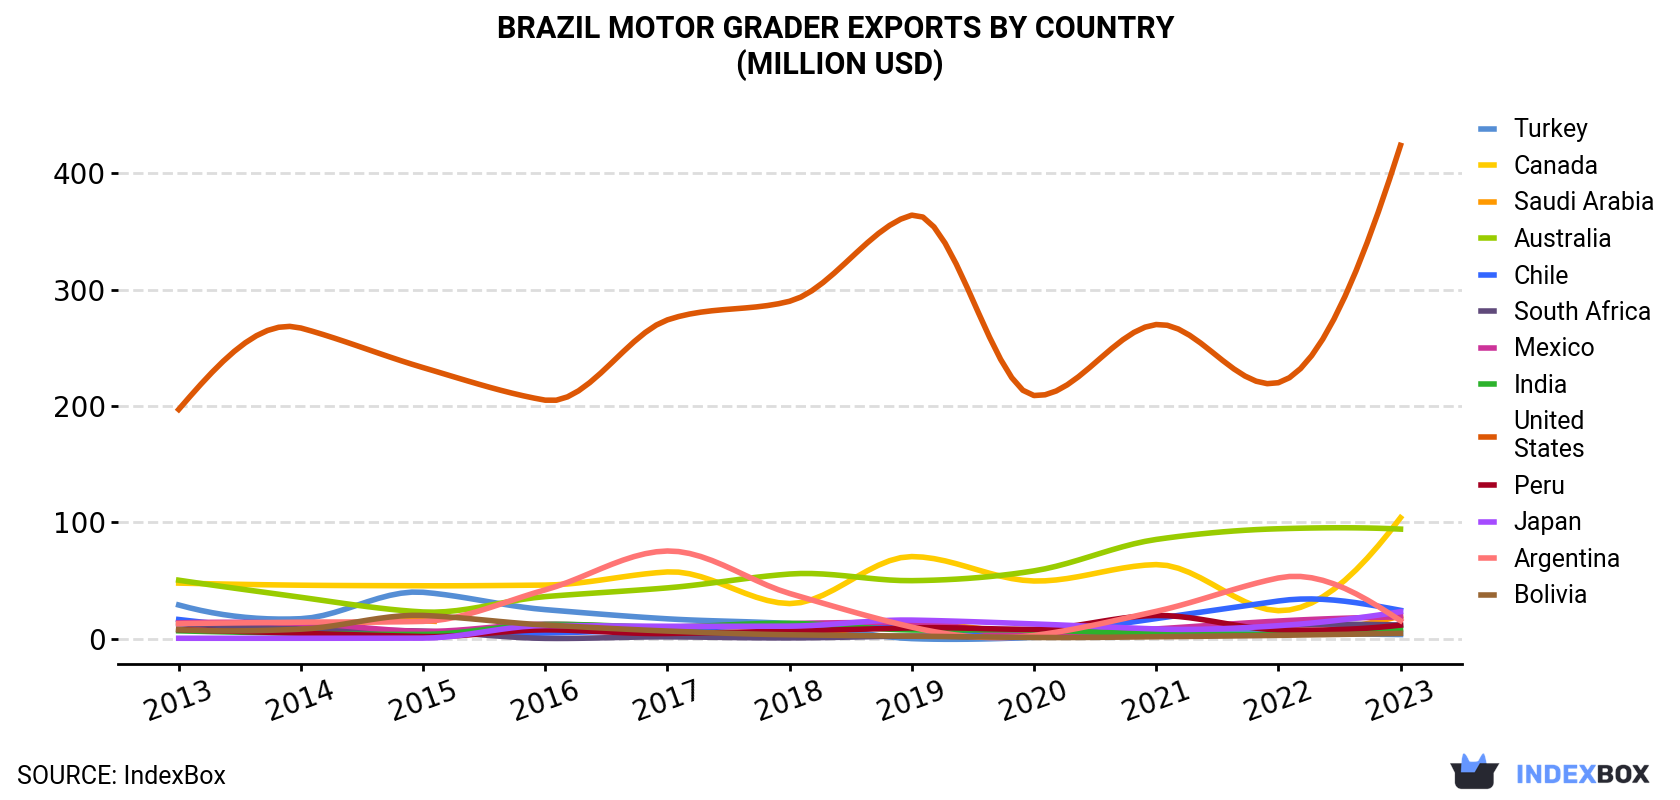 Brazil Motor Grader Exports By Country (Million USD)